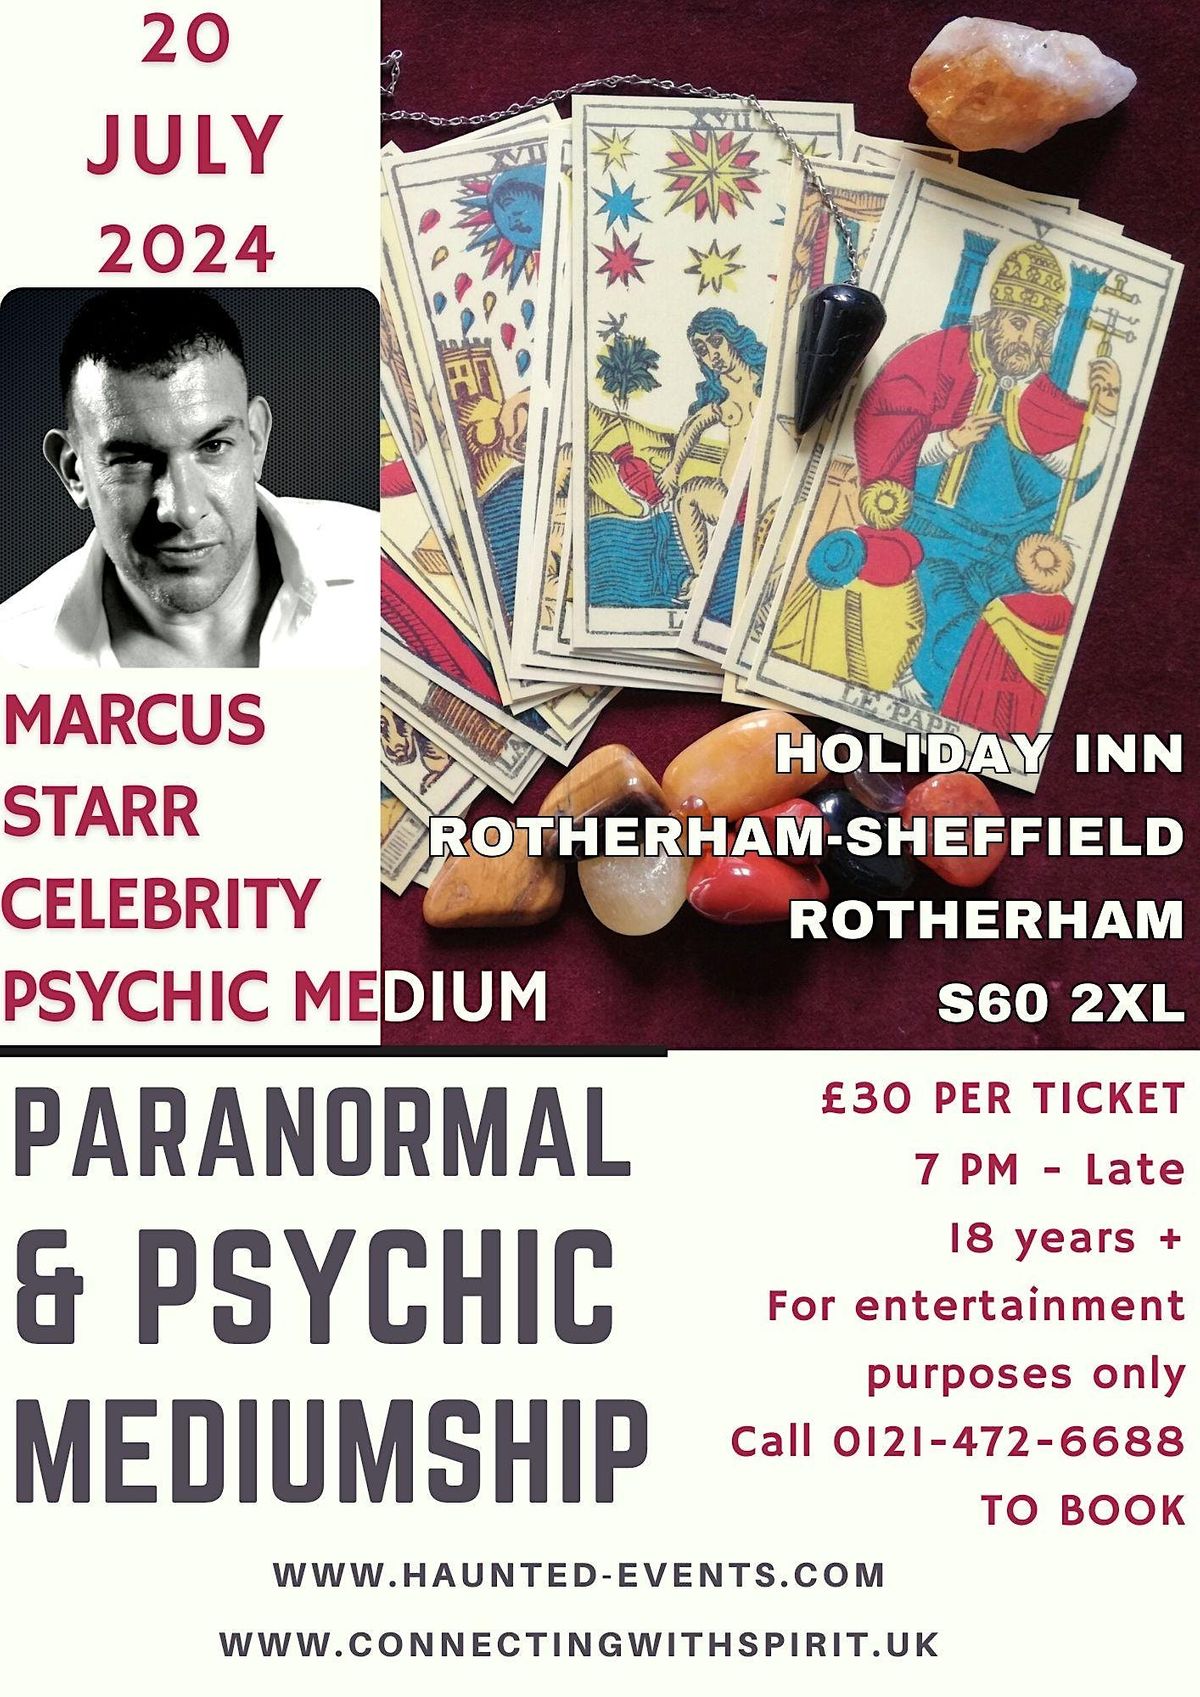 Paranormal & Mediumship with Celebrity Psychic Marcus Starr @ Rotherham